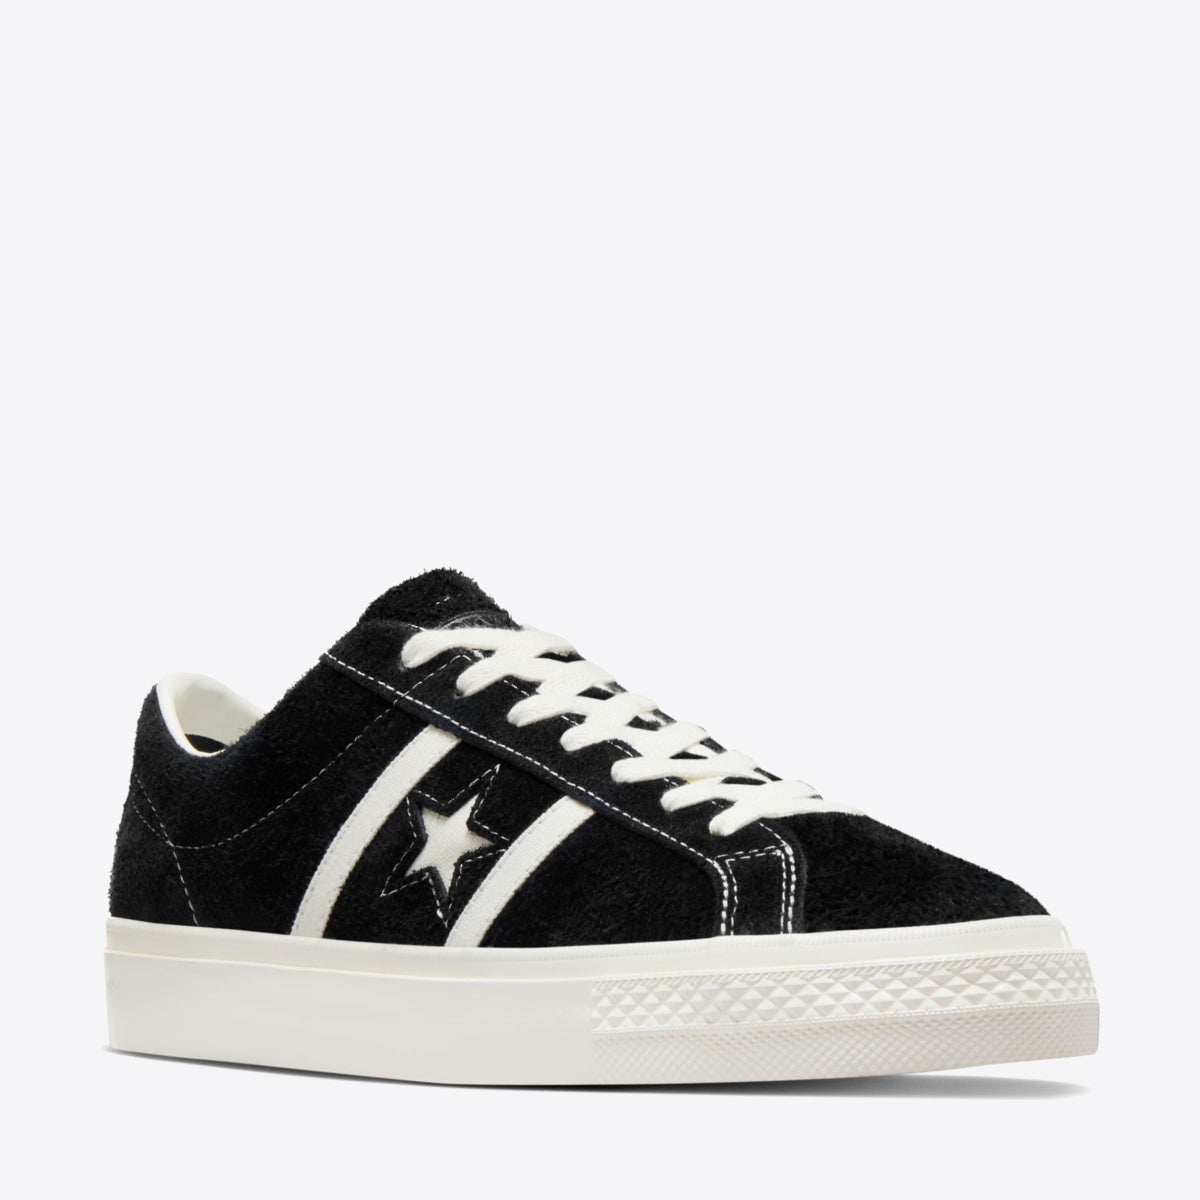 CONVERSE One Star Academy Pro Low Black/Egret - Image 6